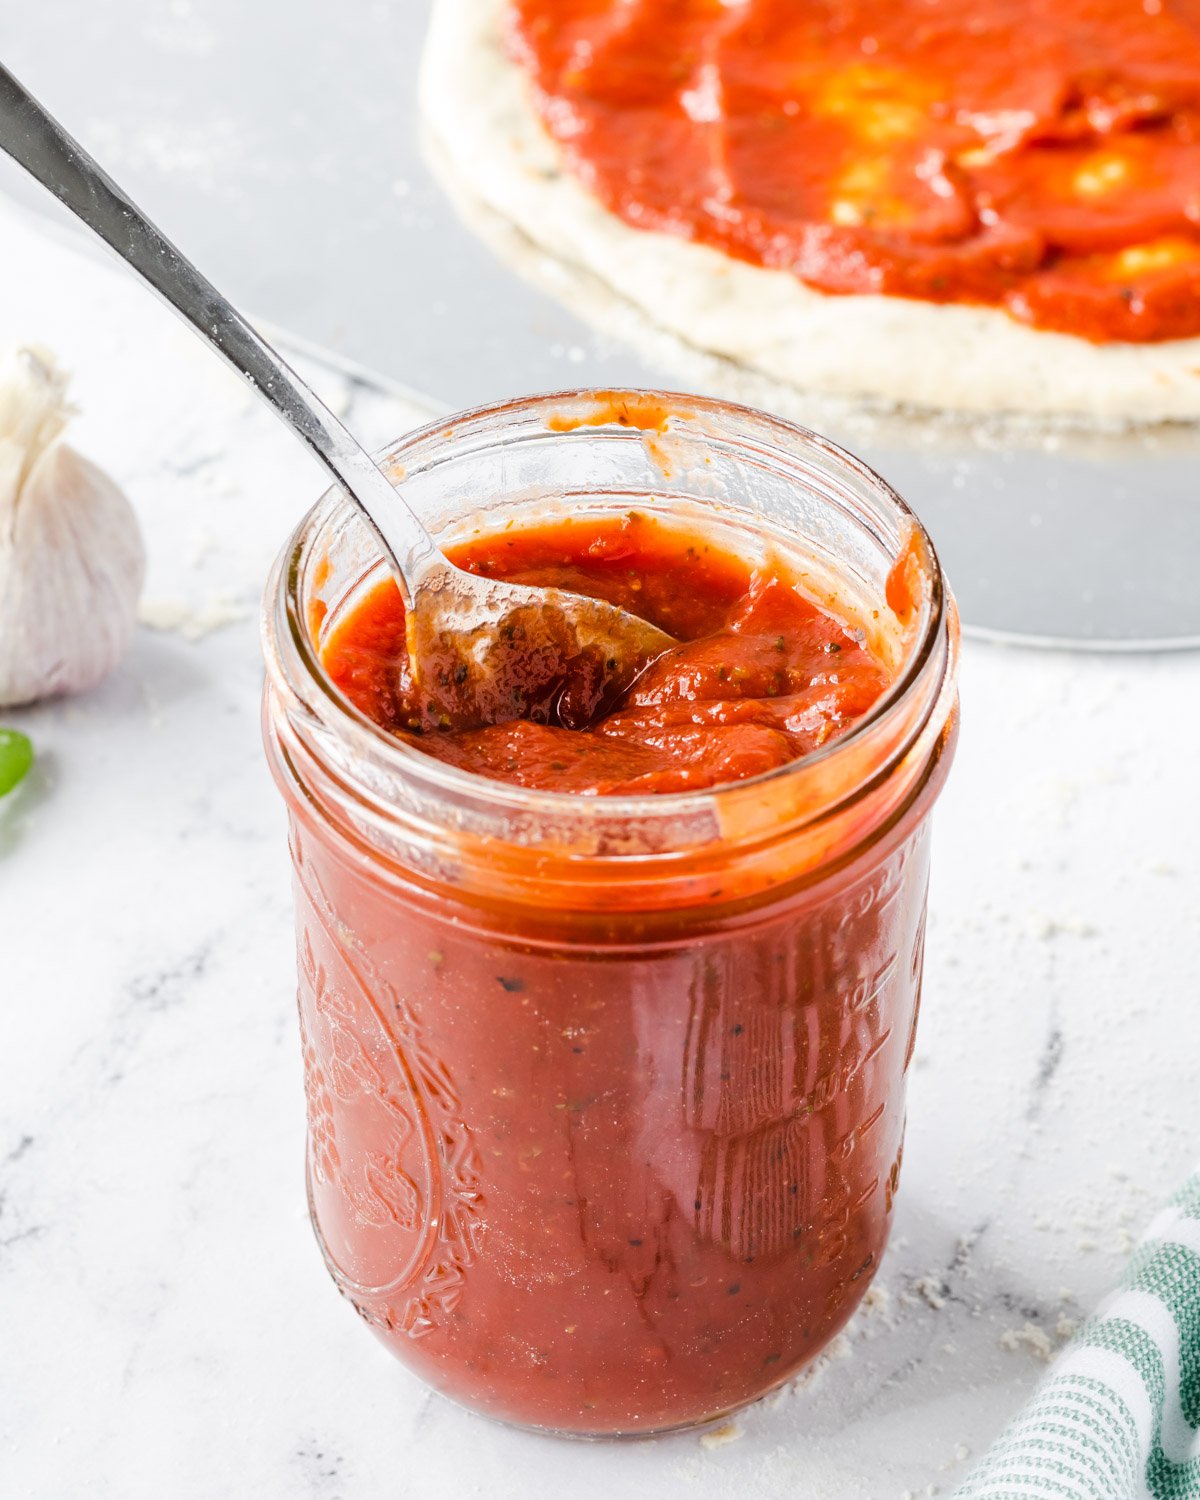 Mason jar of pizza sauce with a topped pizza in background.